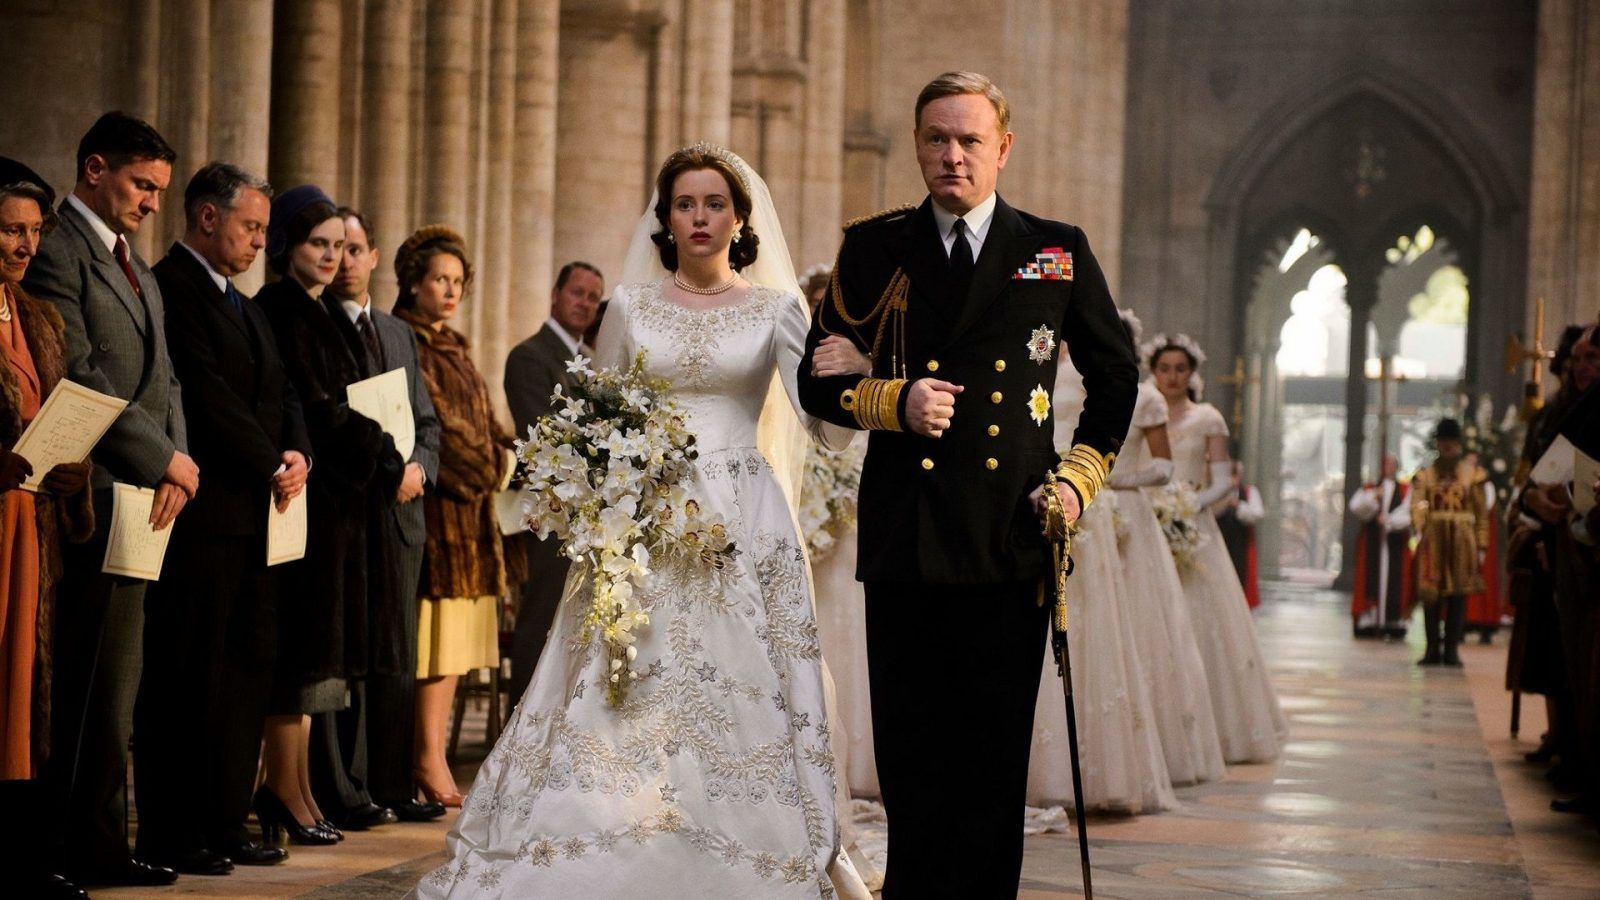 ‘The Crown’ to ‘Her Majesty’: TV shows and movies based on the British royal family